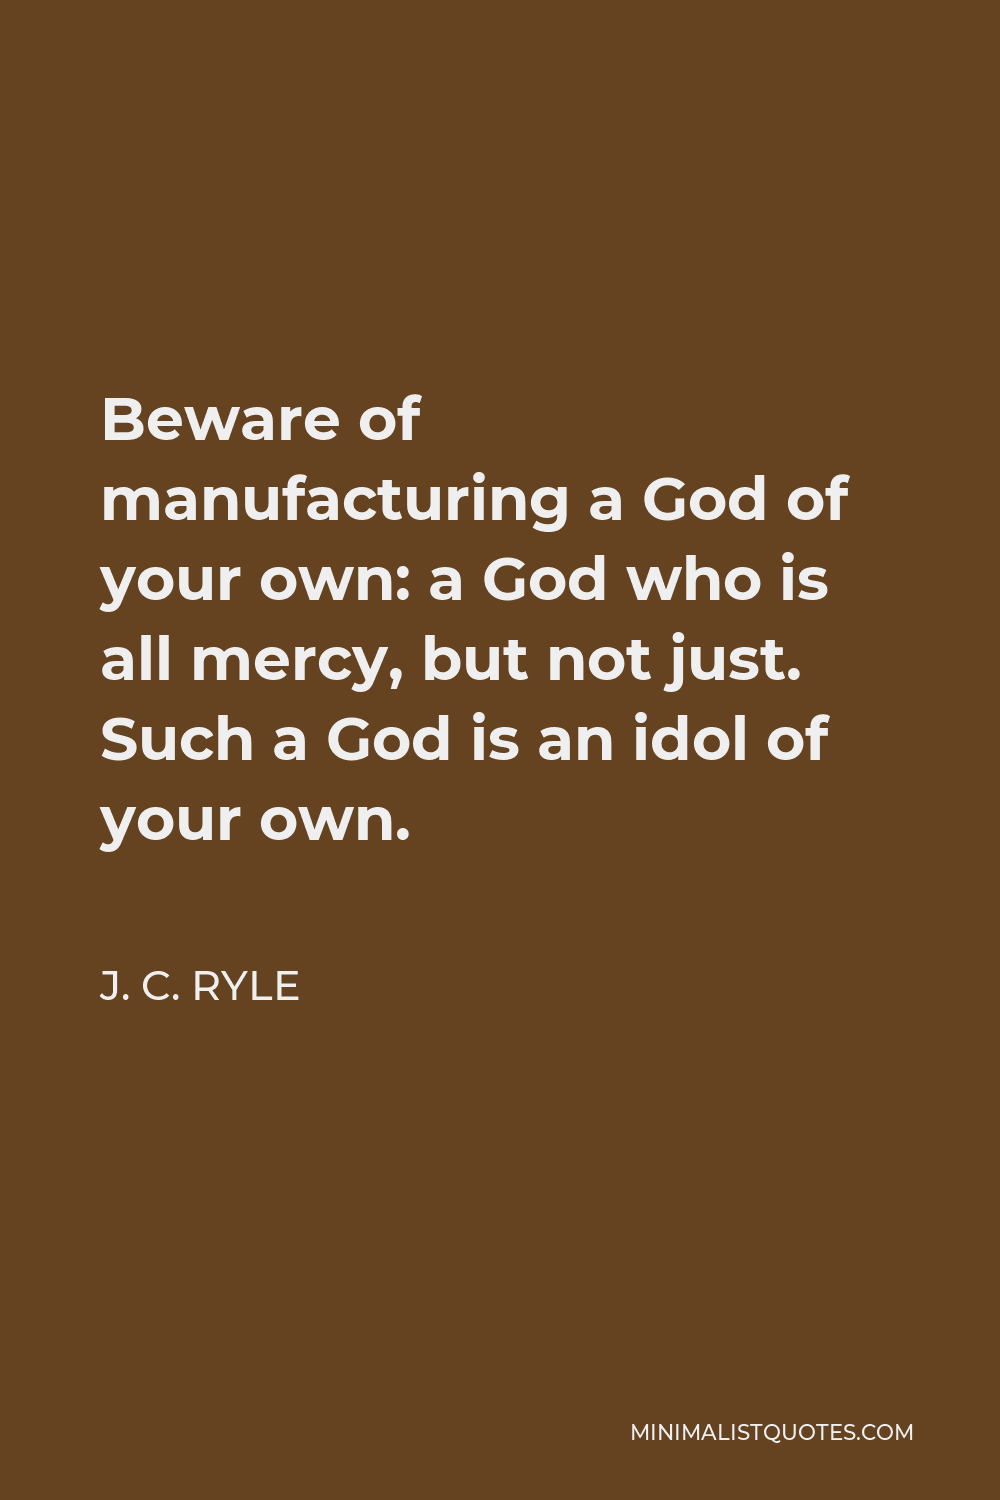 J. C. Ryle Quote - Beware of manufacturing a God of your own: a God who is all mercy, but not just. Such a God is an idol of your own.